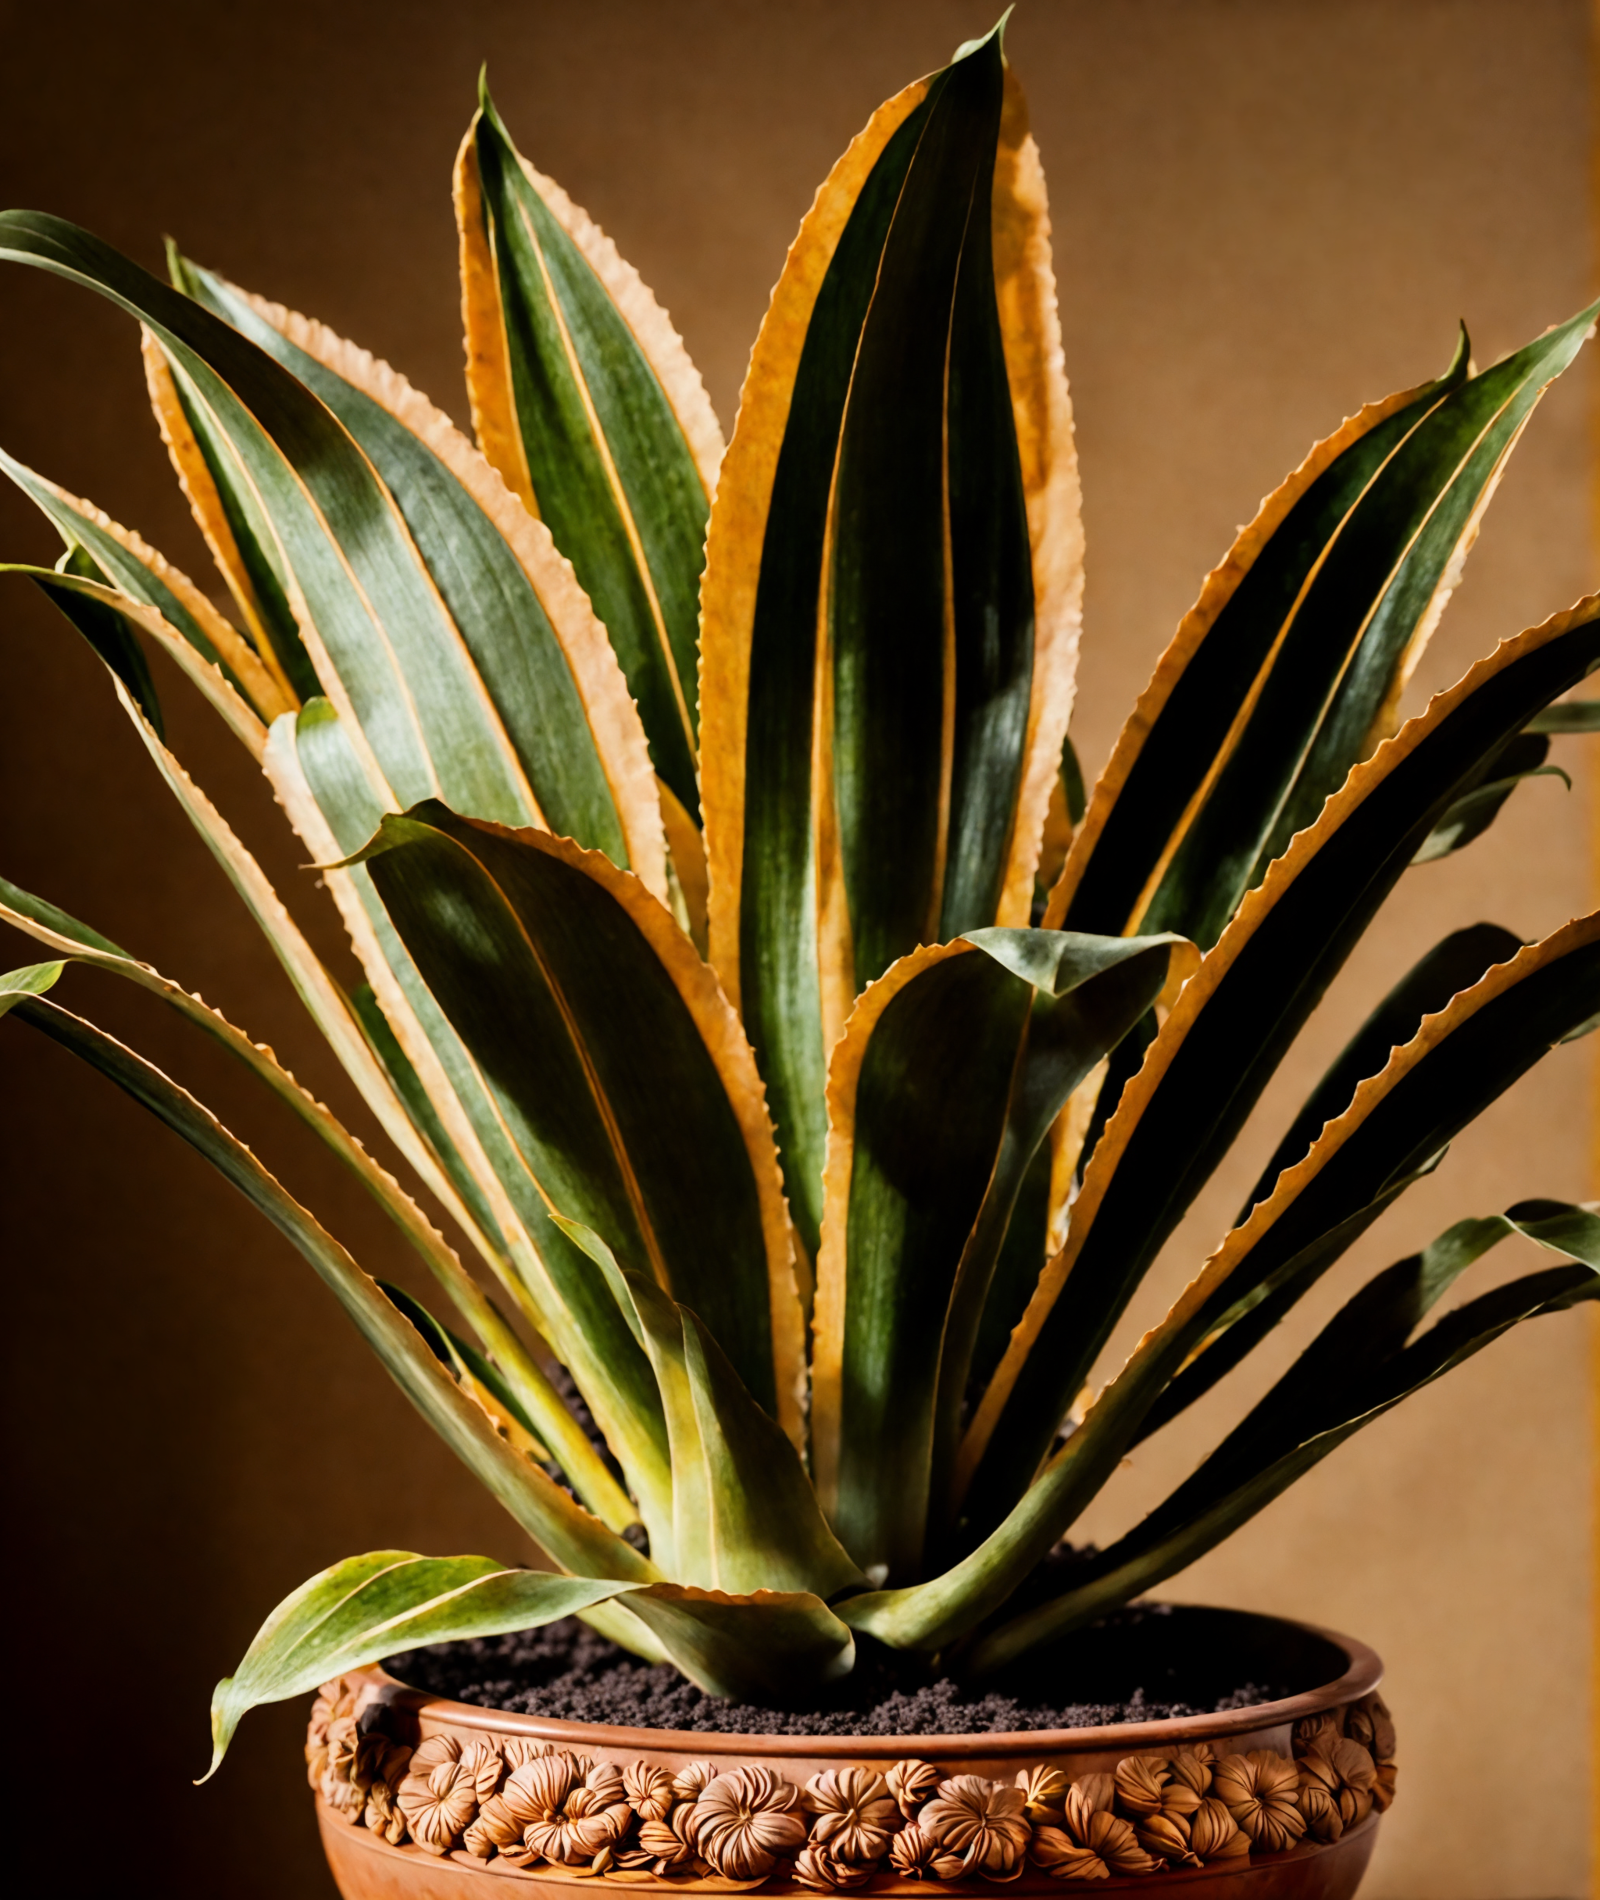 Agave americana in a planter, with a dark background and clear lighting, part of indoor decor.